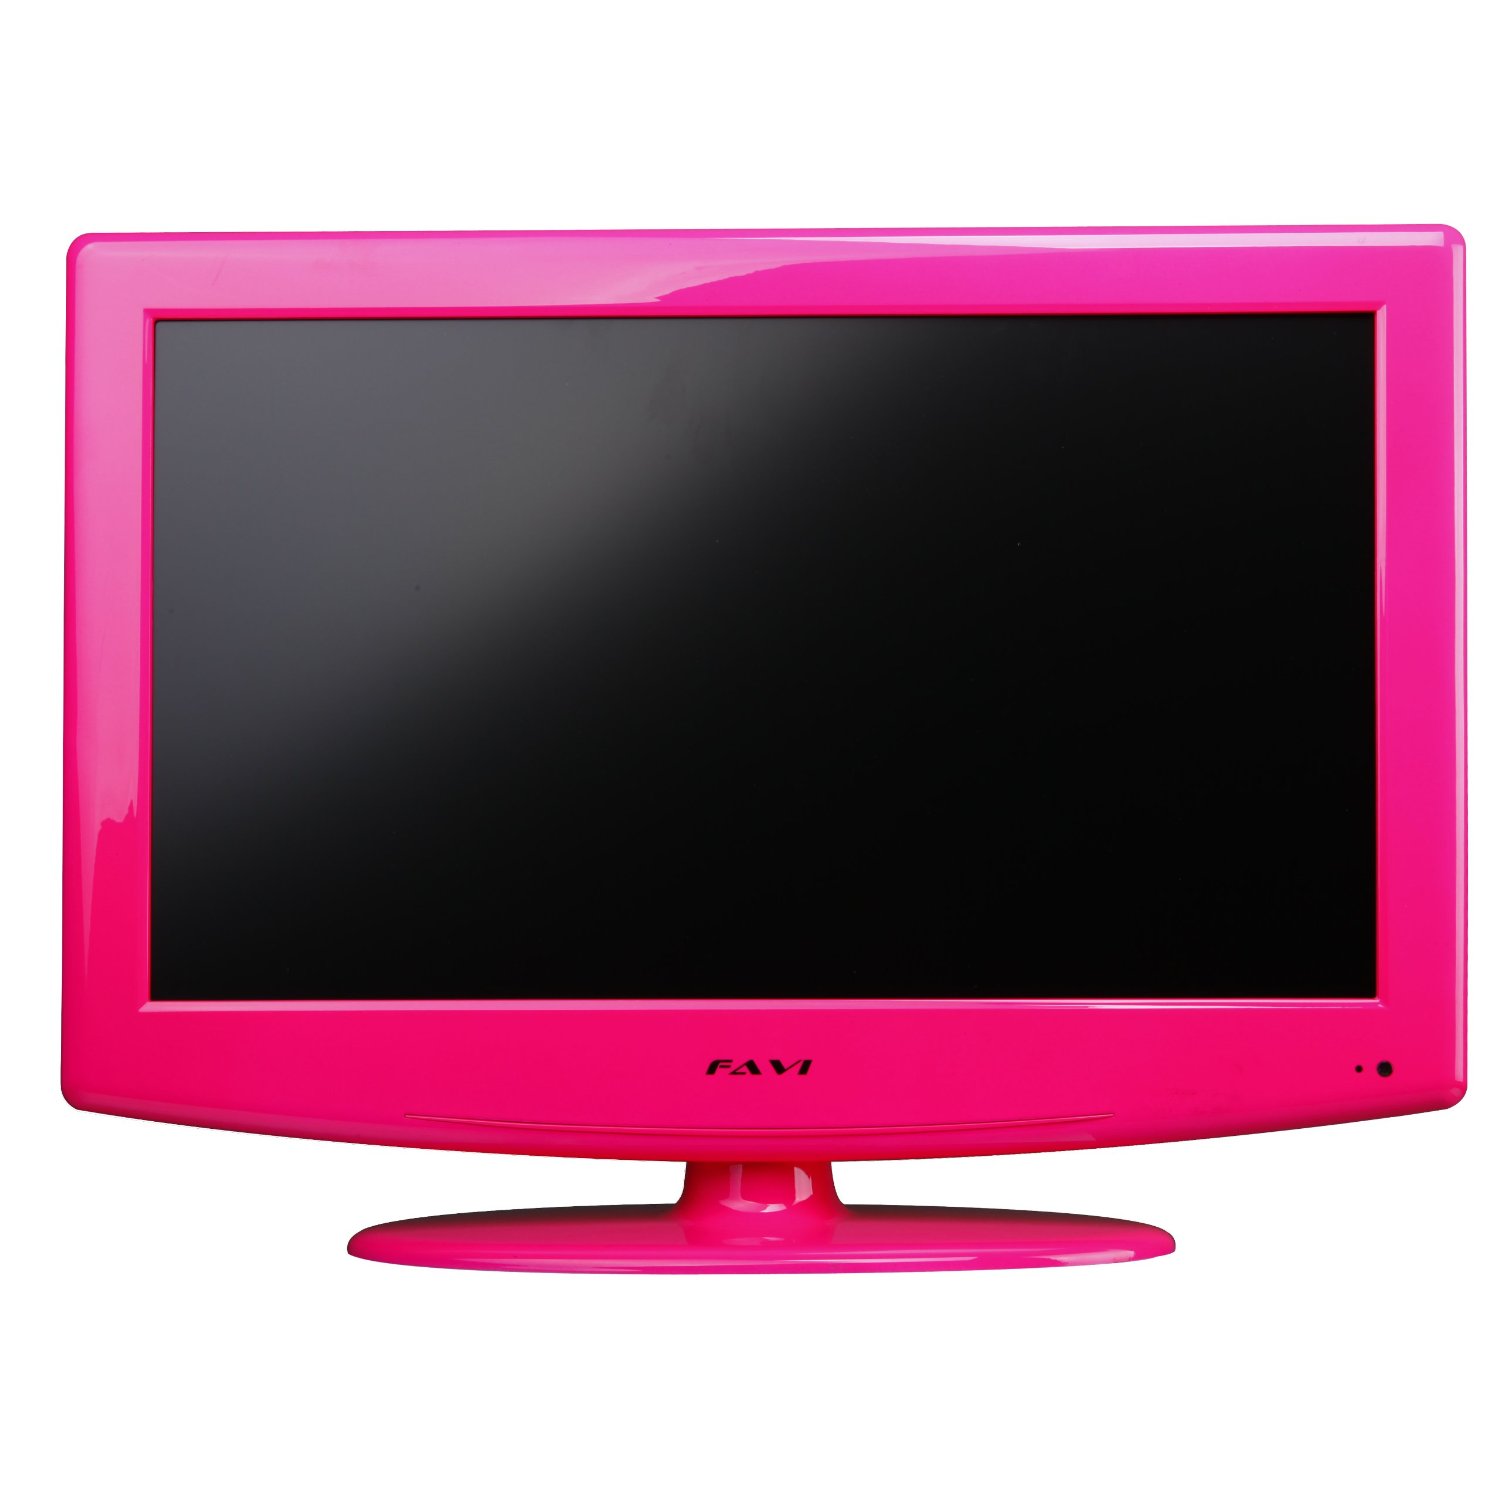 pink television - Video Search Engine at Search.com1500 x 1500